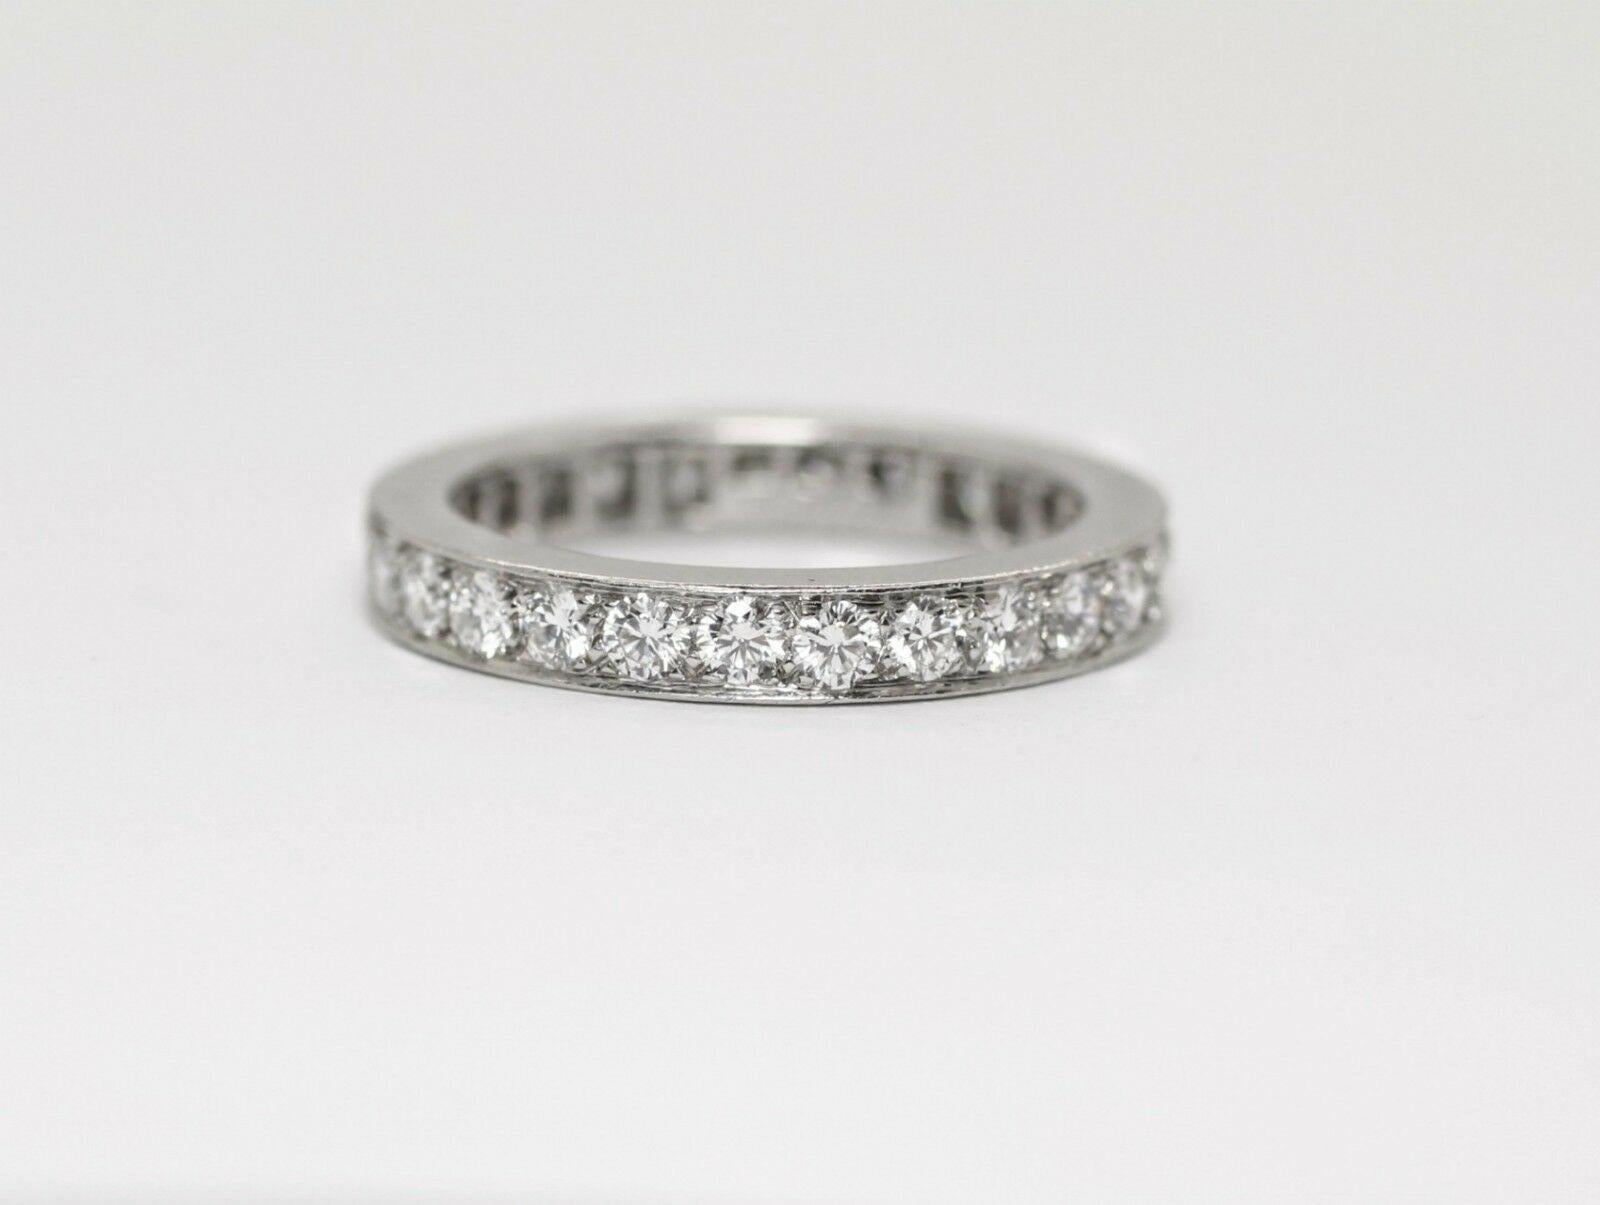 
             This is a pre-owned Van Cleef & Arpels Eternity Wedding Band from their Romance Ring Collection, and with an estimated retail value of $9,000.00 . This eternity is beautifully crafted with near-colorless diamonds set in 4 prongs around